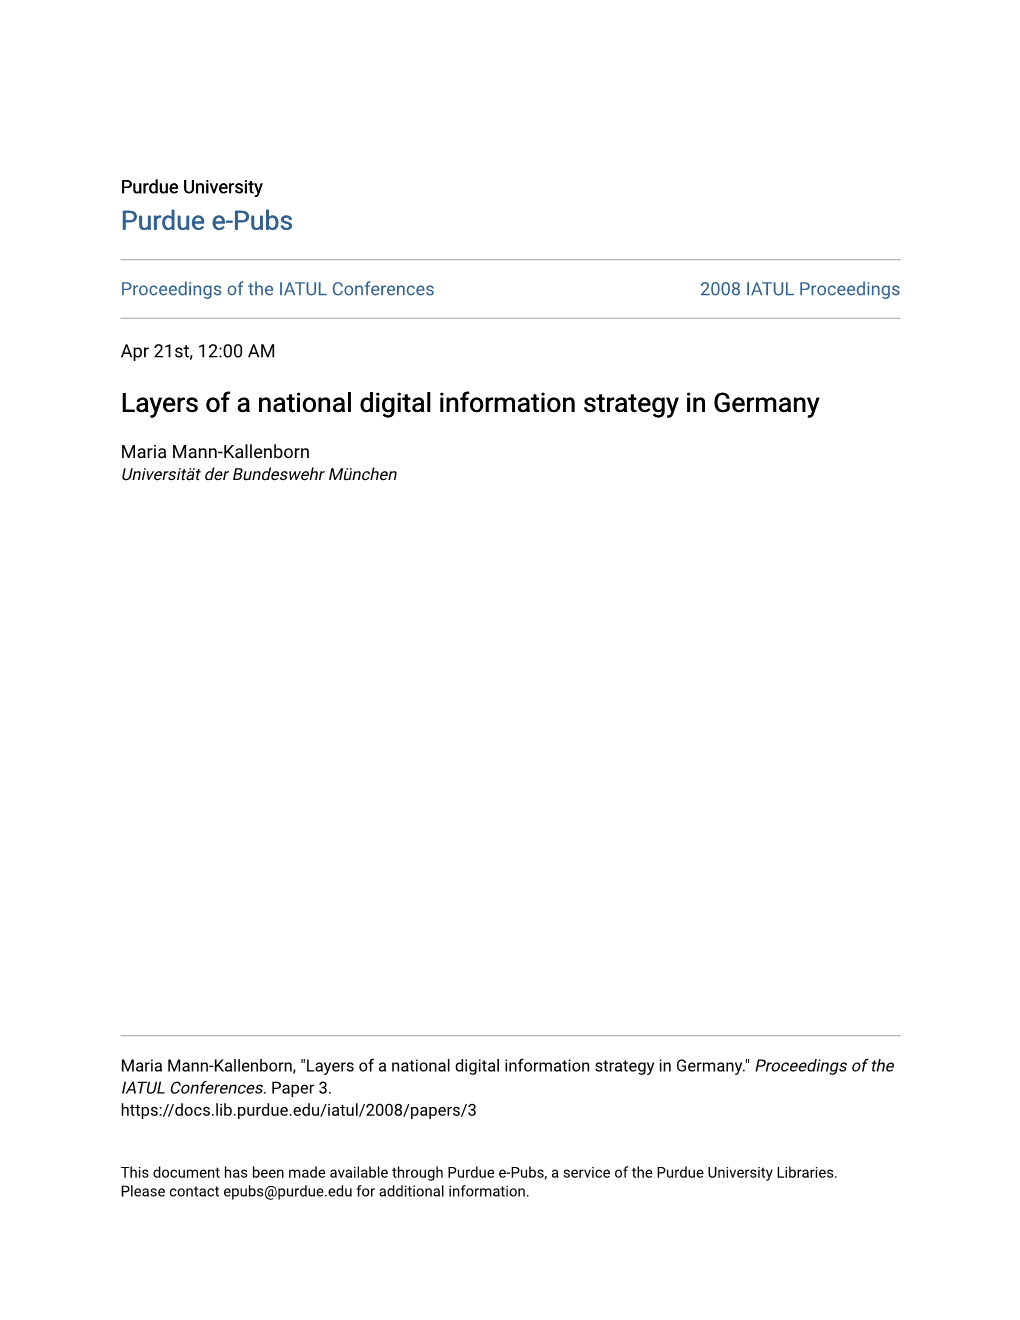 Layers of a National Digital Information Strategy in Germany